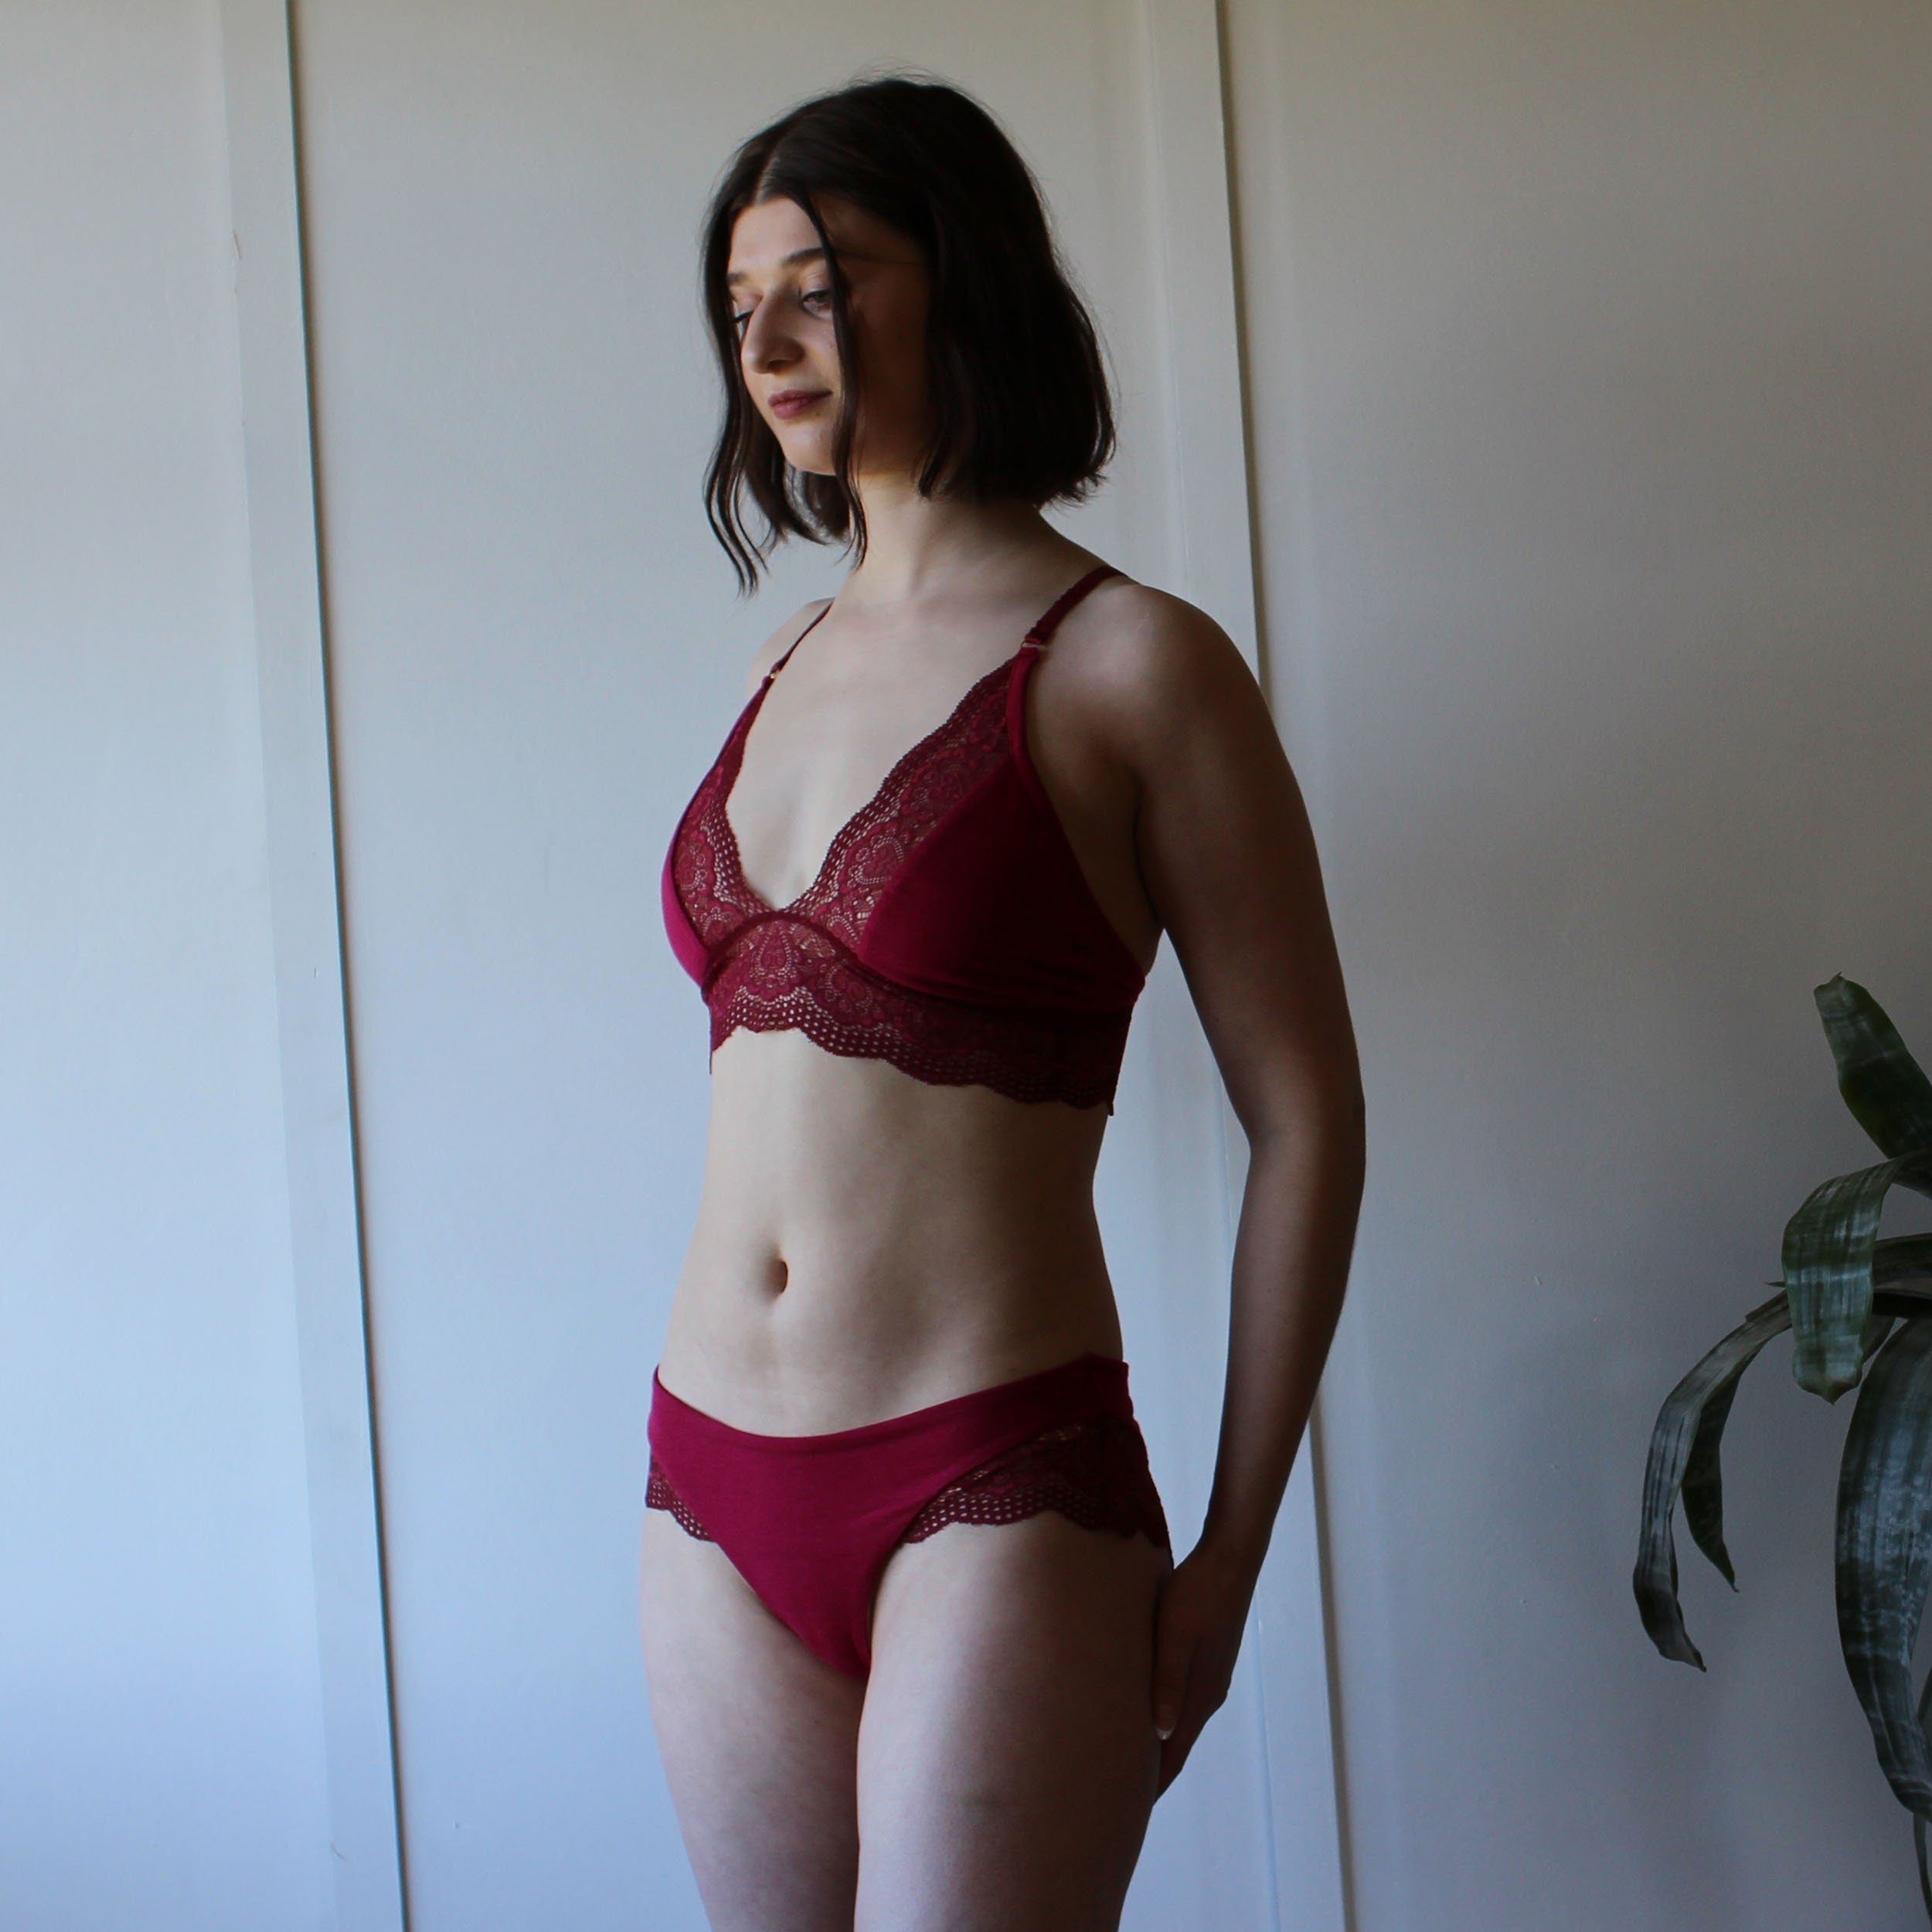 Tencel Organic Cotton Lingerie Set with Lace Trim, Organic Underwear, Natural Sleepwear, Made to Order, Made in the USA